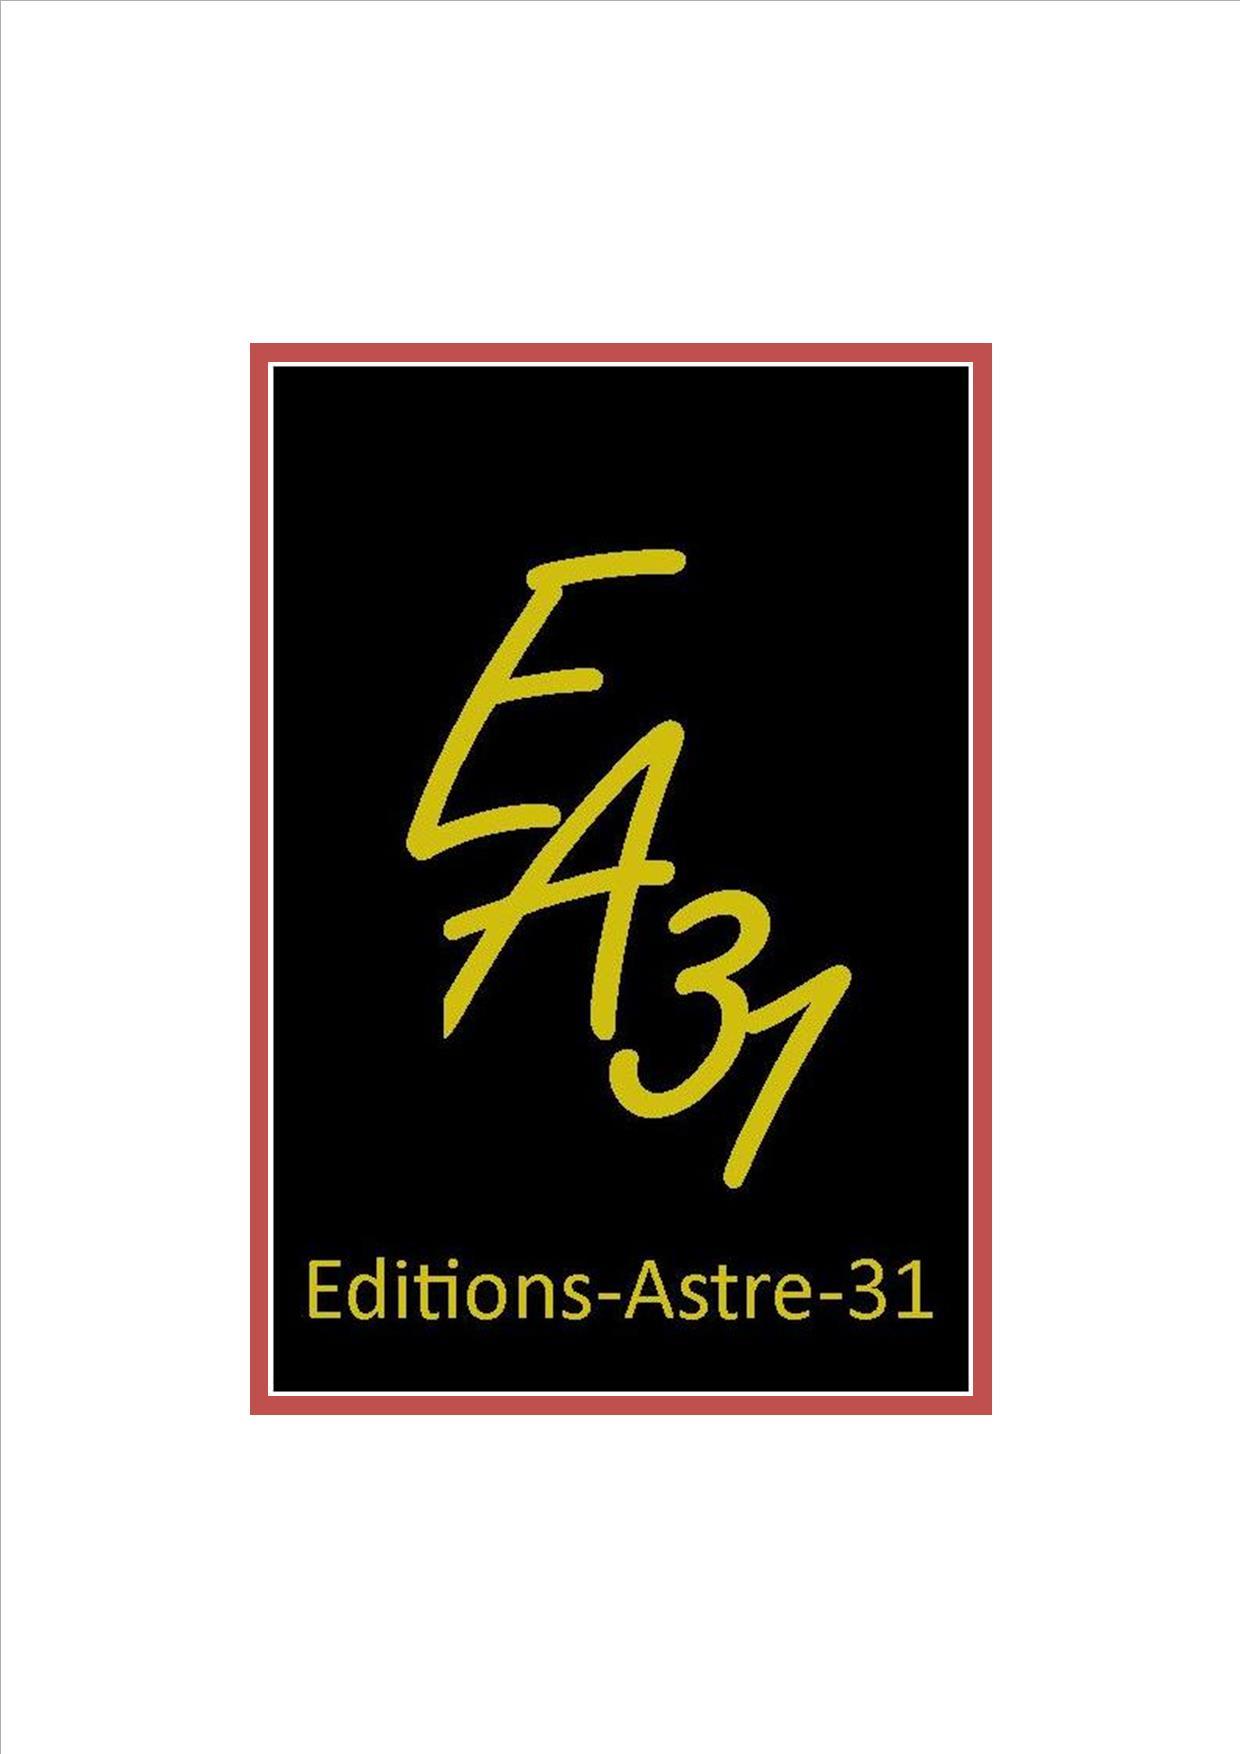 Editions astre 31 001 lettrejpg